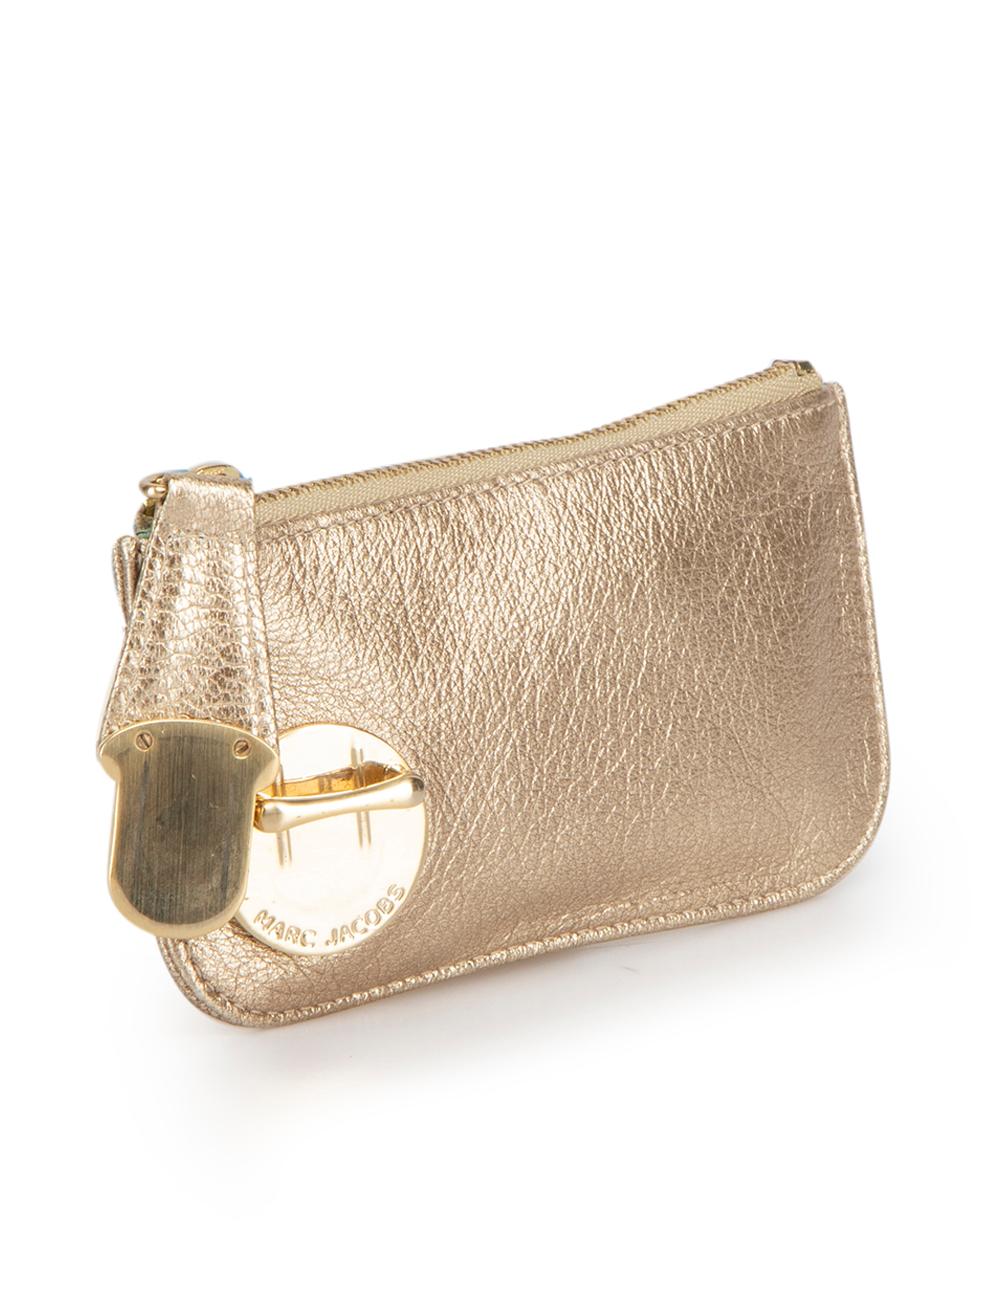 CONDITION is Very good. Minimal wear to purse is evident. Minimal wear to the hardware with small scuff marks on this used Marc Jacobs designer resale item.



Details


Gold

Leather

Zip x push lock fastening

Interior suede lining

Gold tone